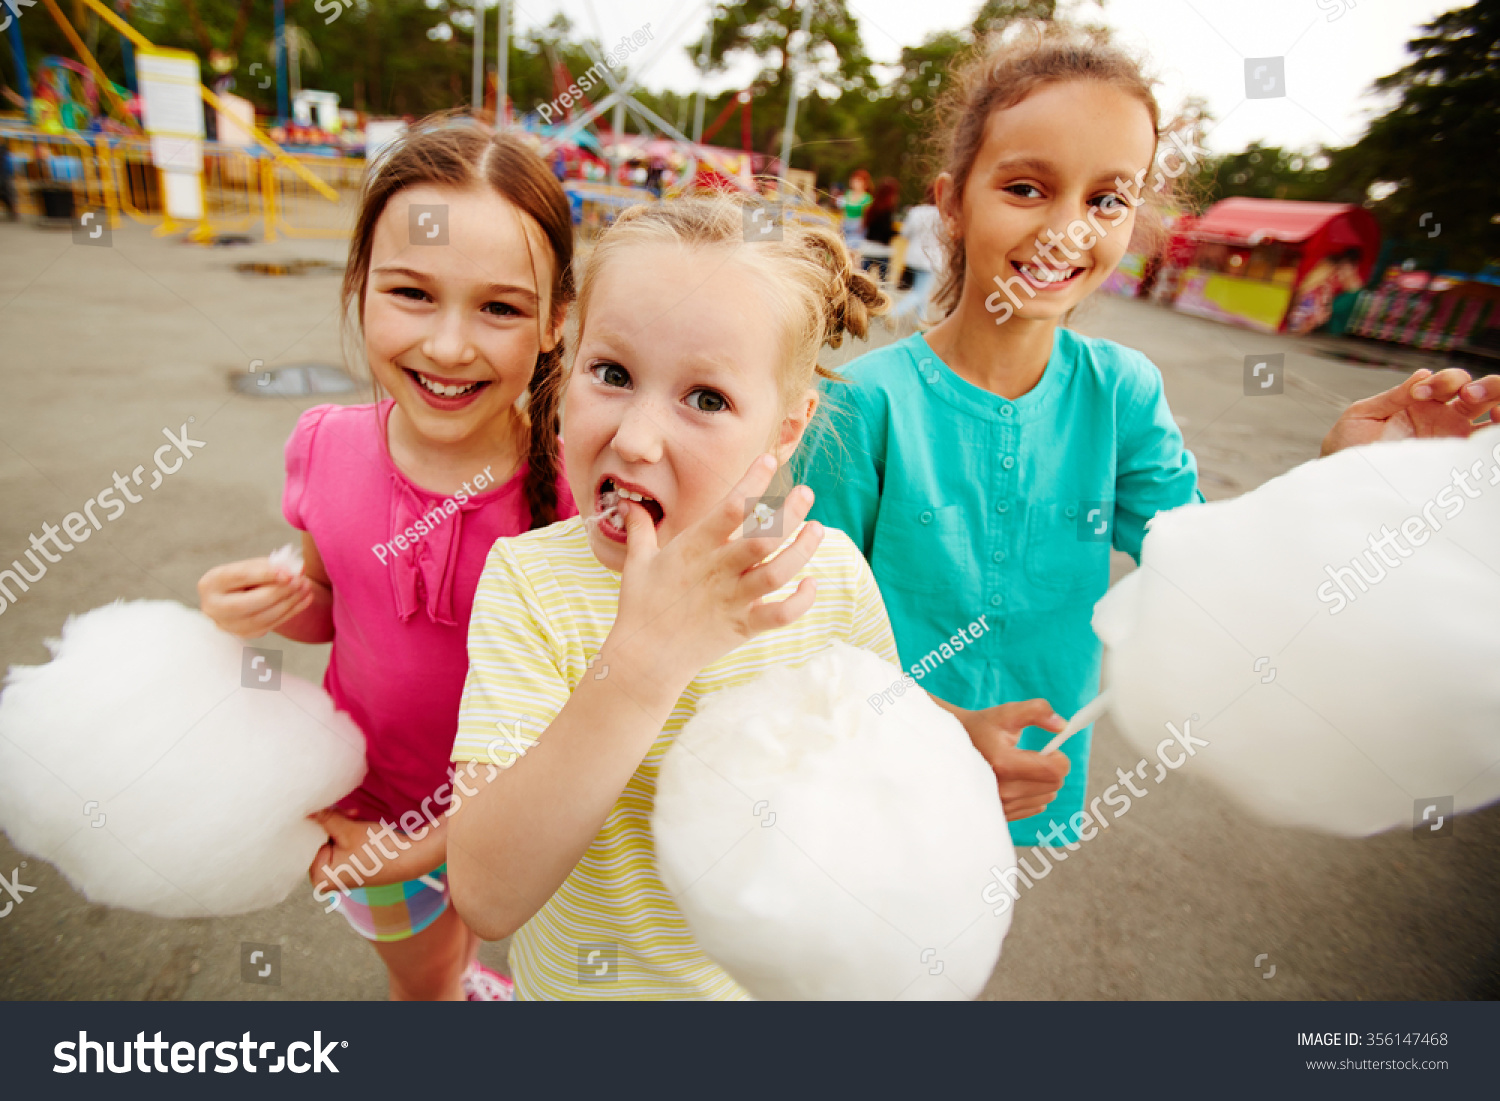 Happy girls eating cotton candy in the park #356147468